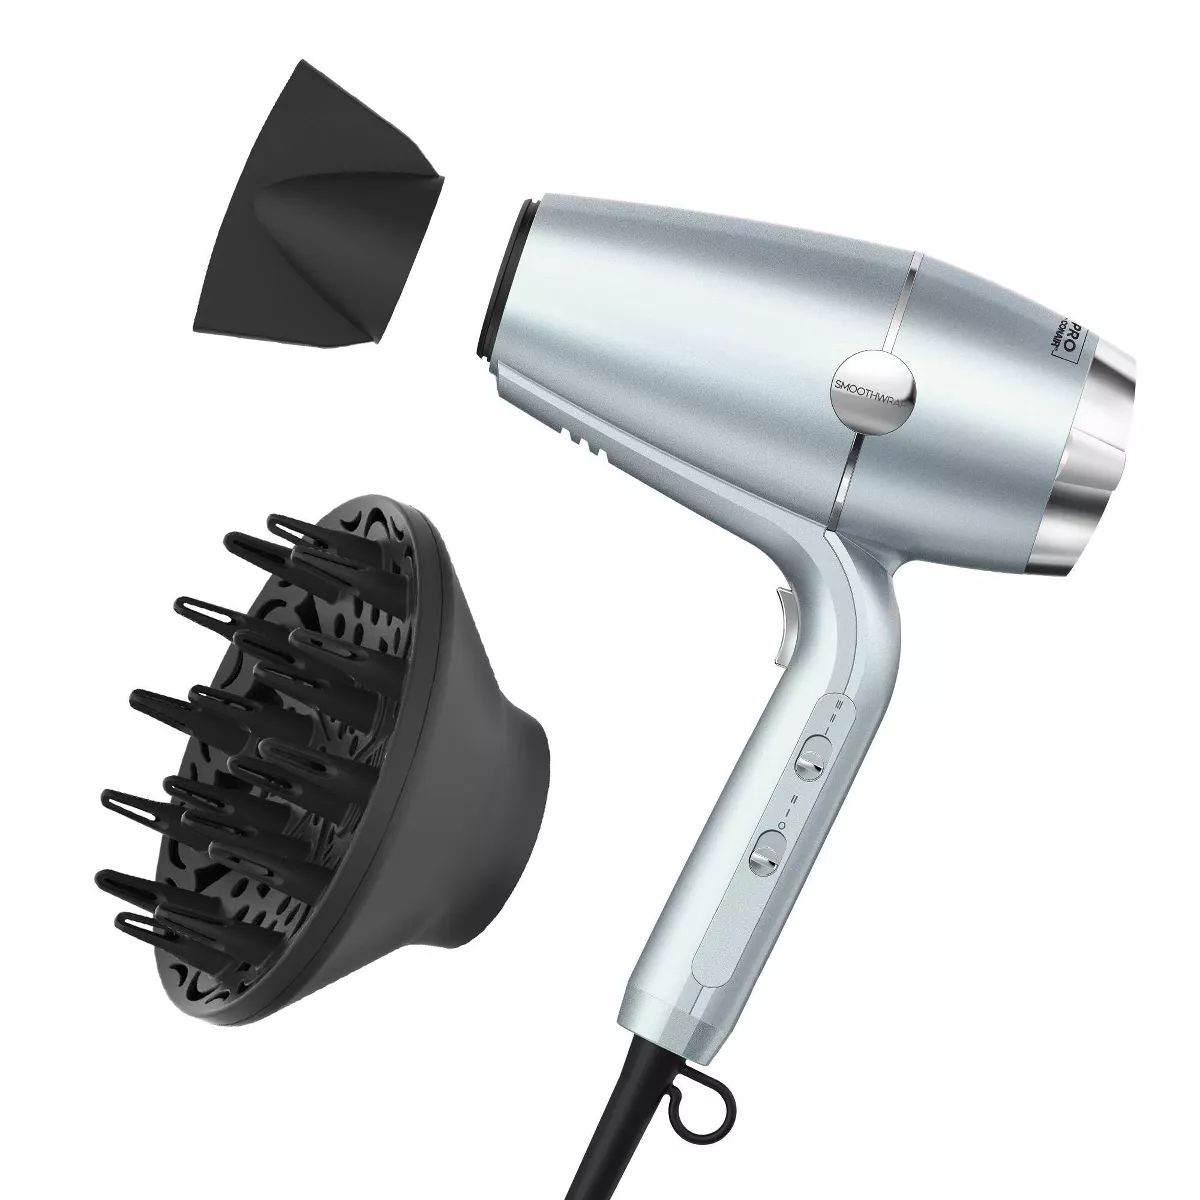 InfinitiPro by Conair SmoothWrap Hair Dryer | Target